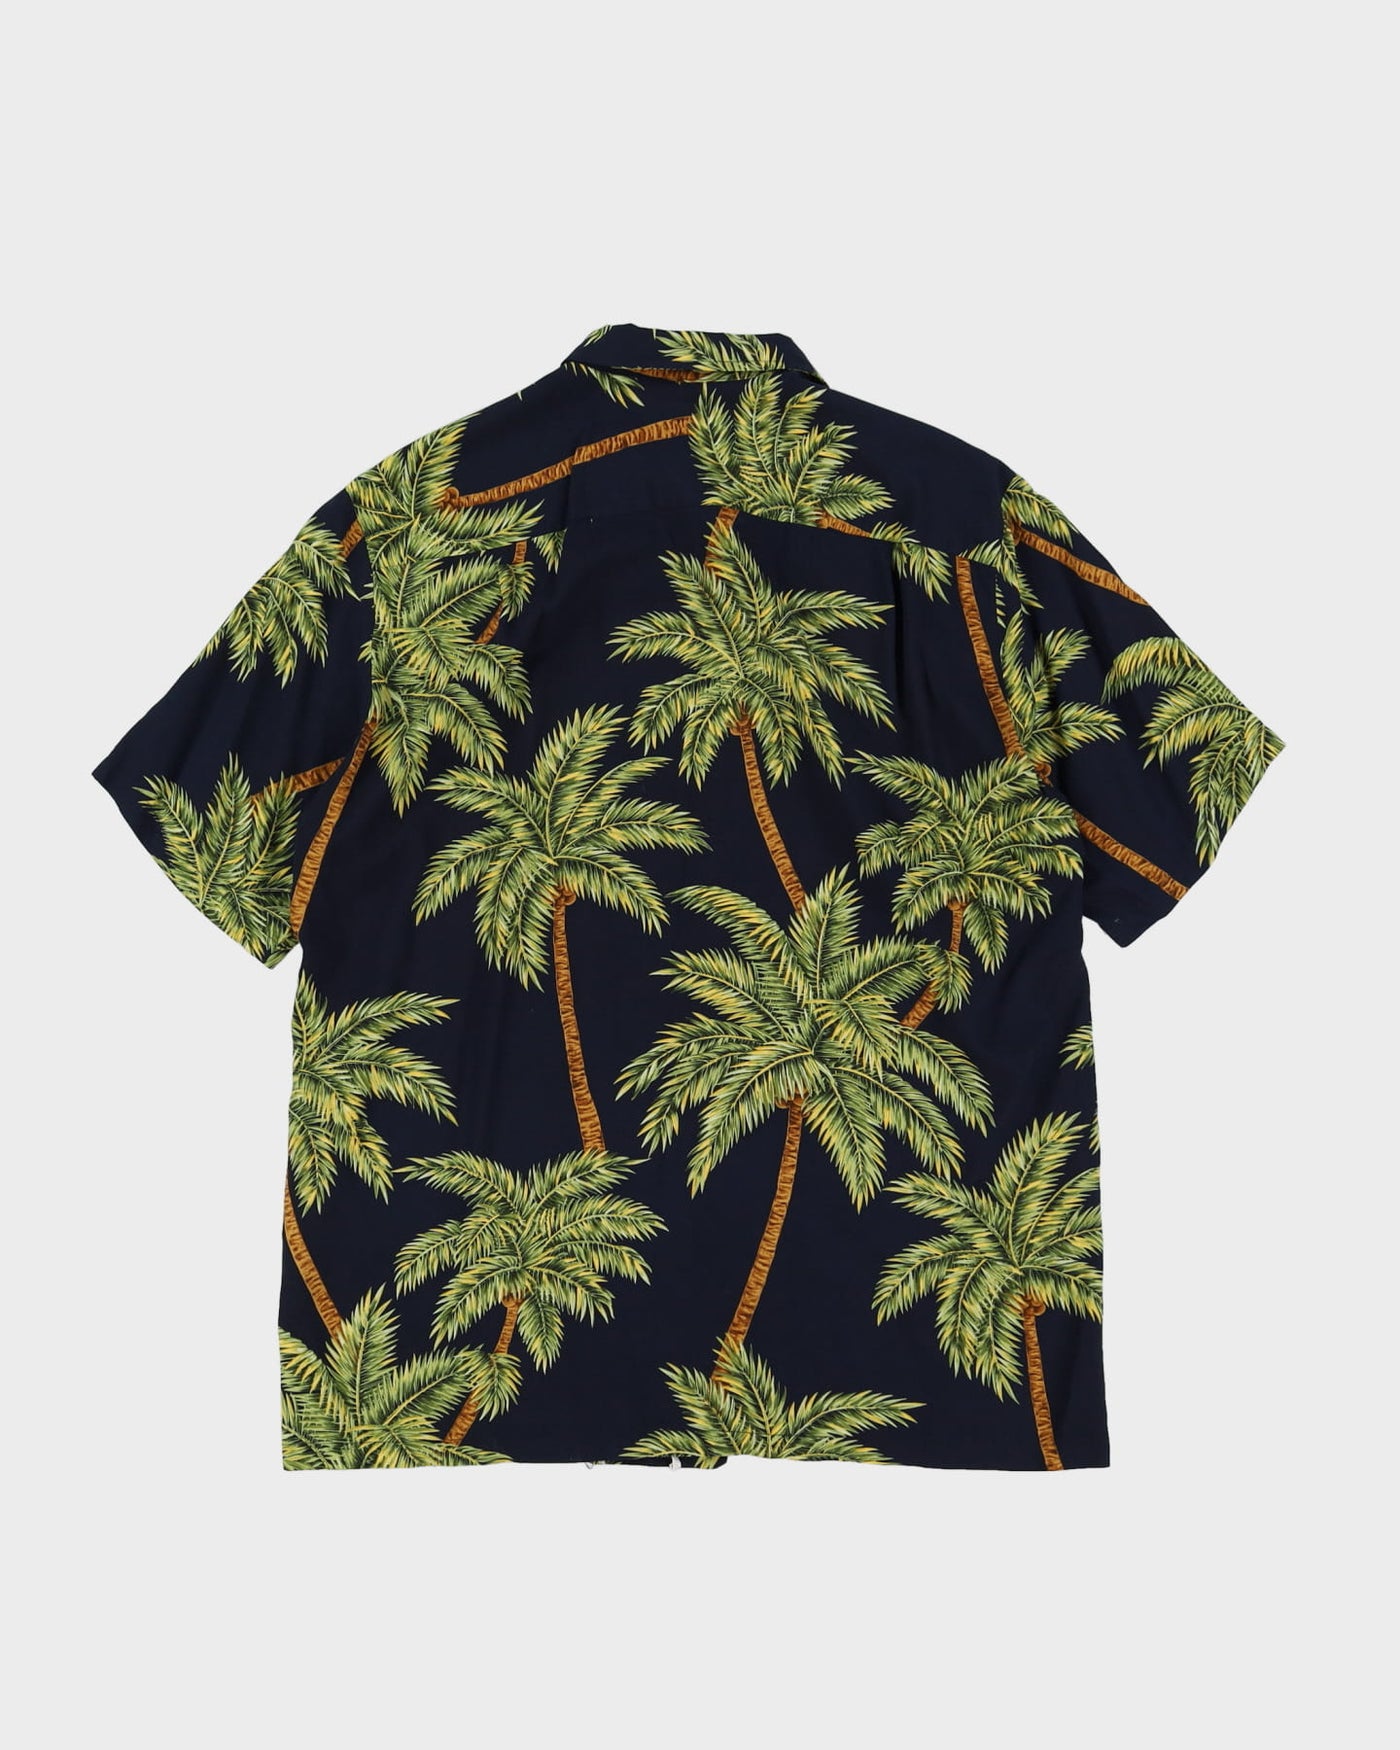 90s Black Palm Tree Patterned Short-Sleeve Hawaiian Relaxed Oversized Fit Shirt - M (XL)